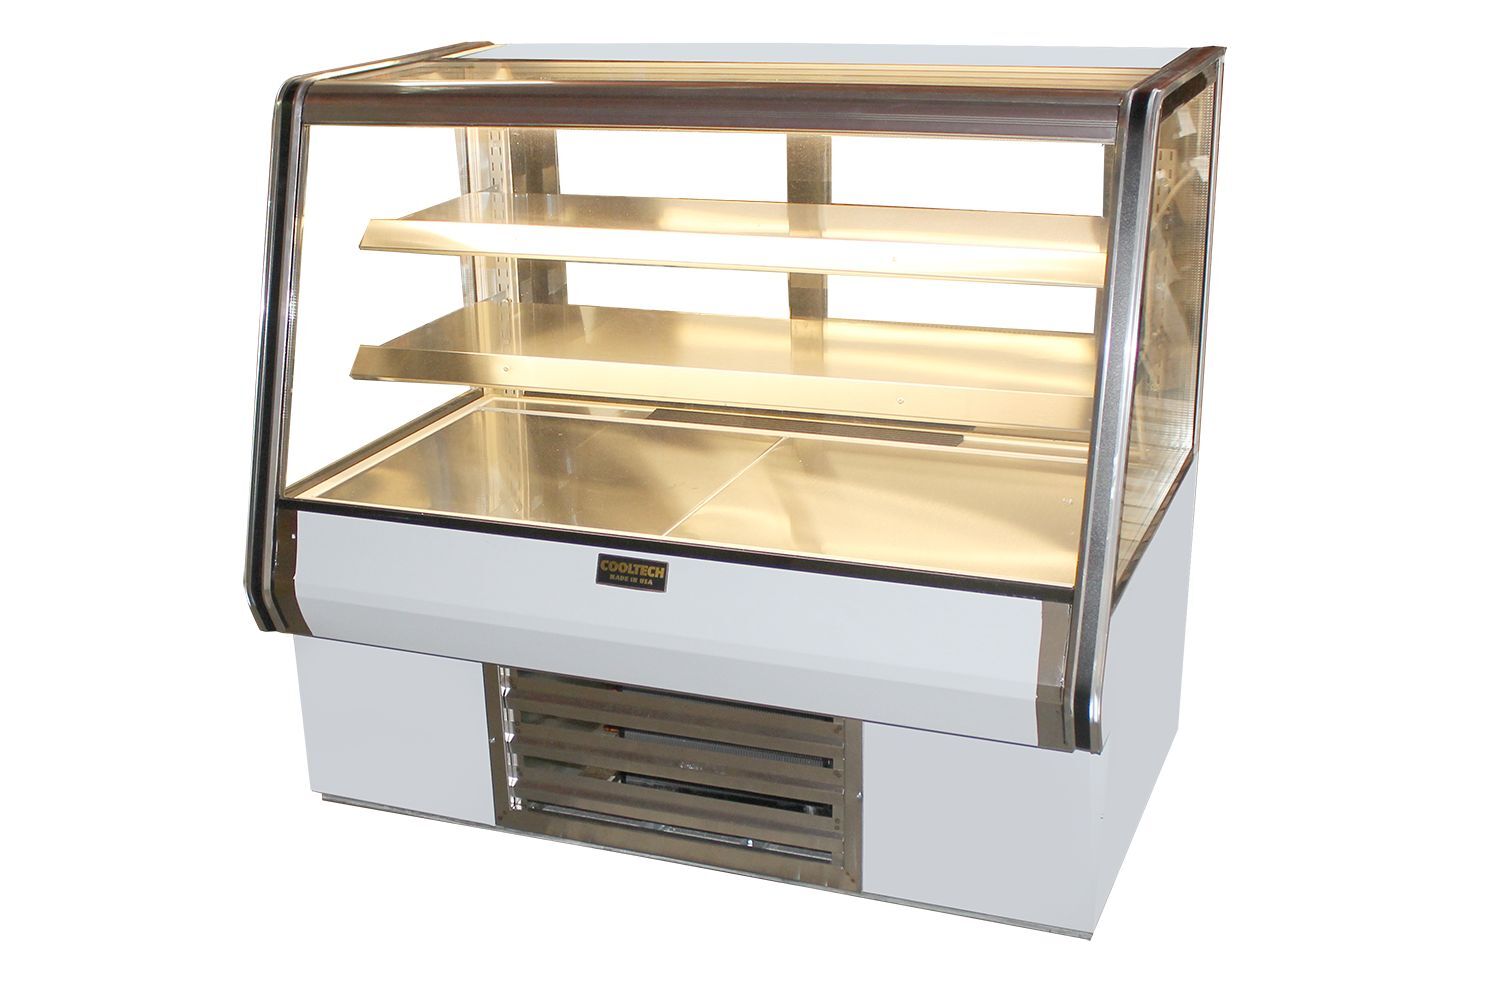 Cooltech Counter Bakery Pastry Display Case 72” with glass windows and multiple shelves, featuring a stainless steel and white exterior.